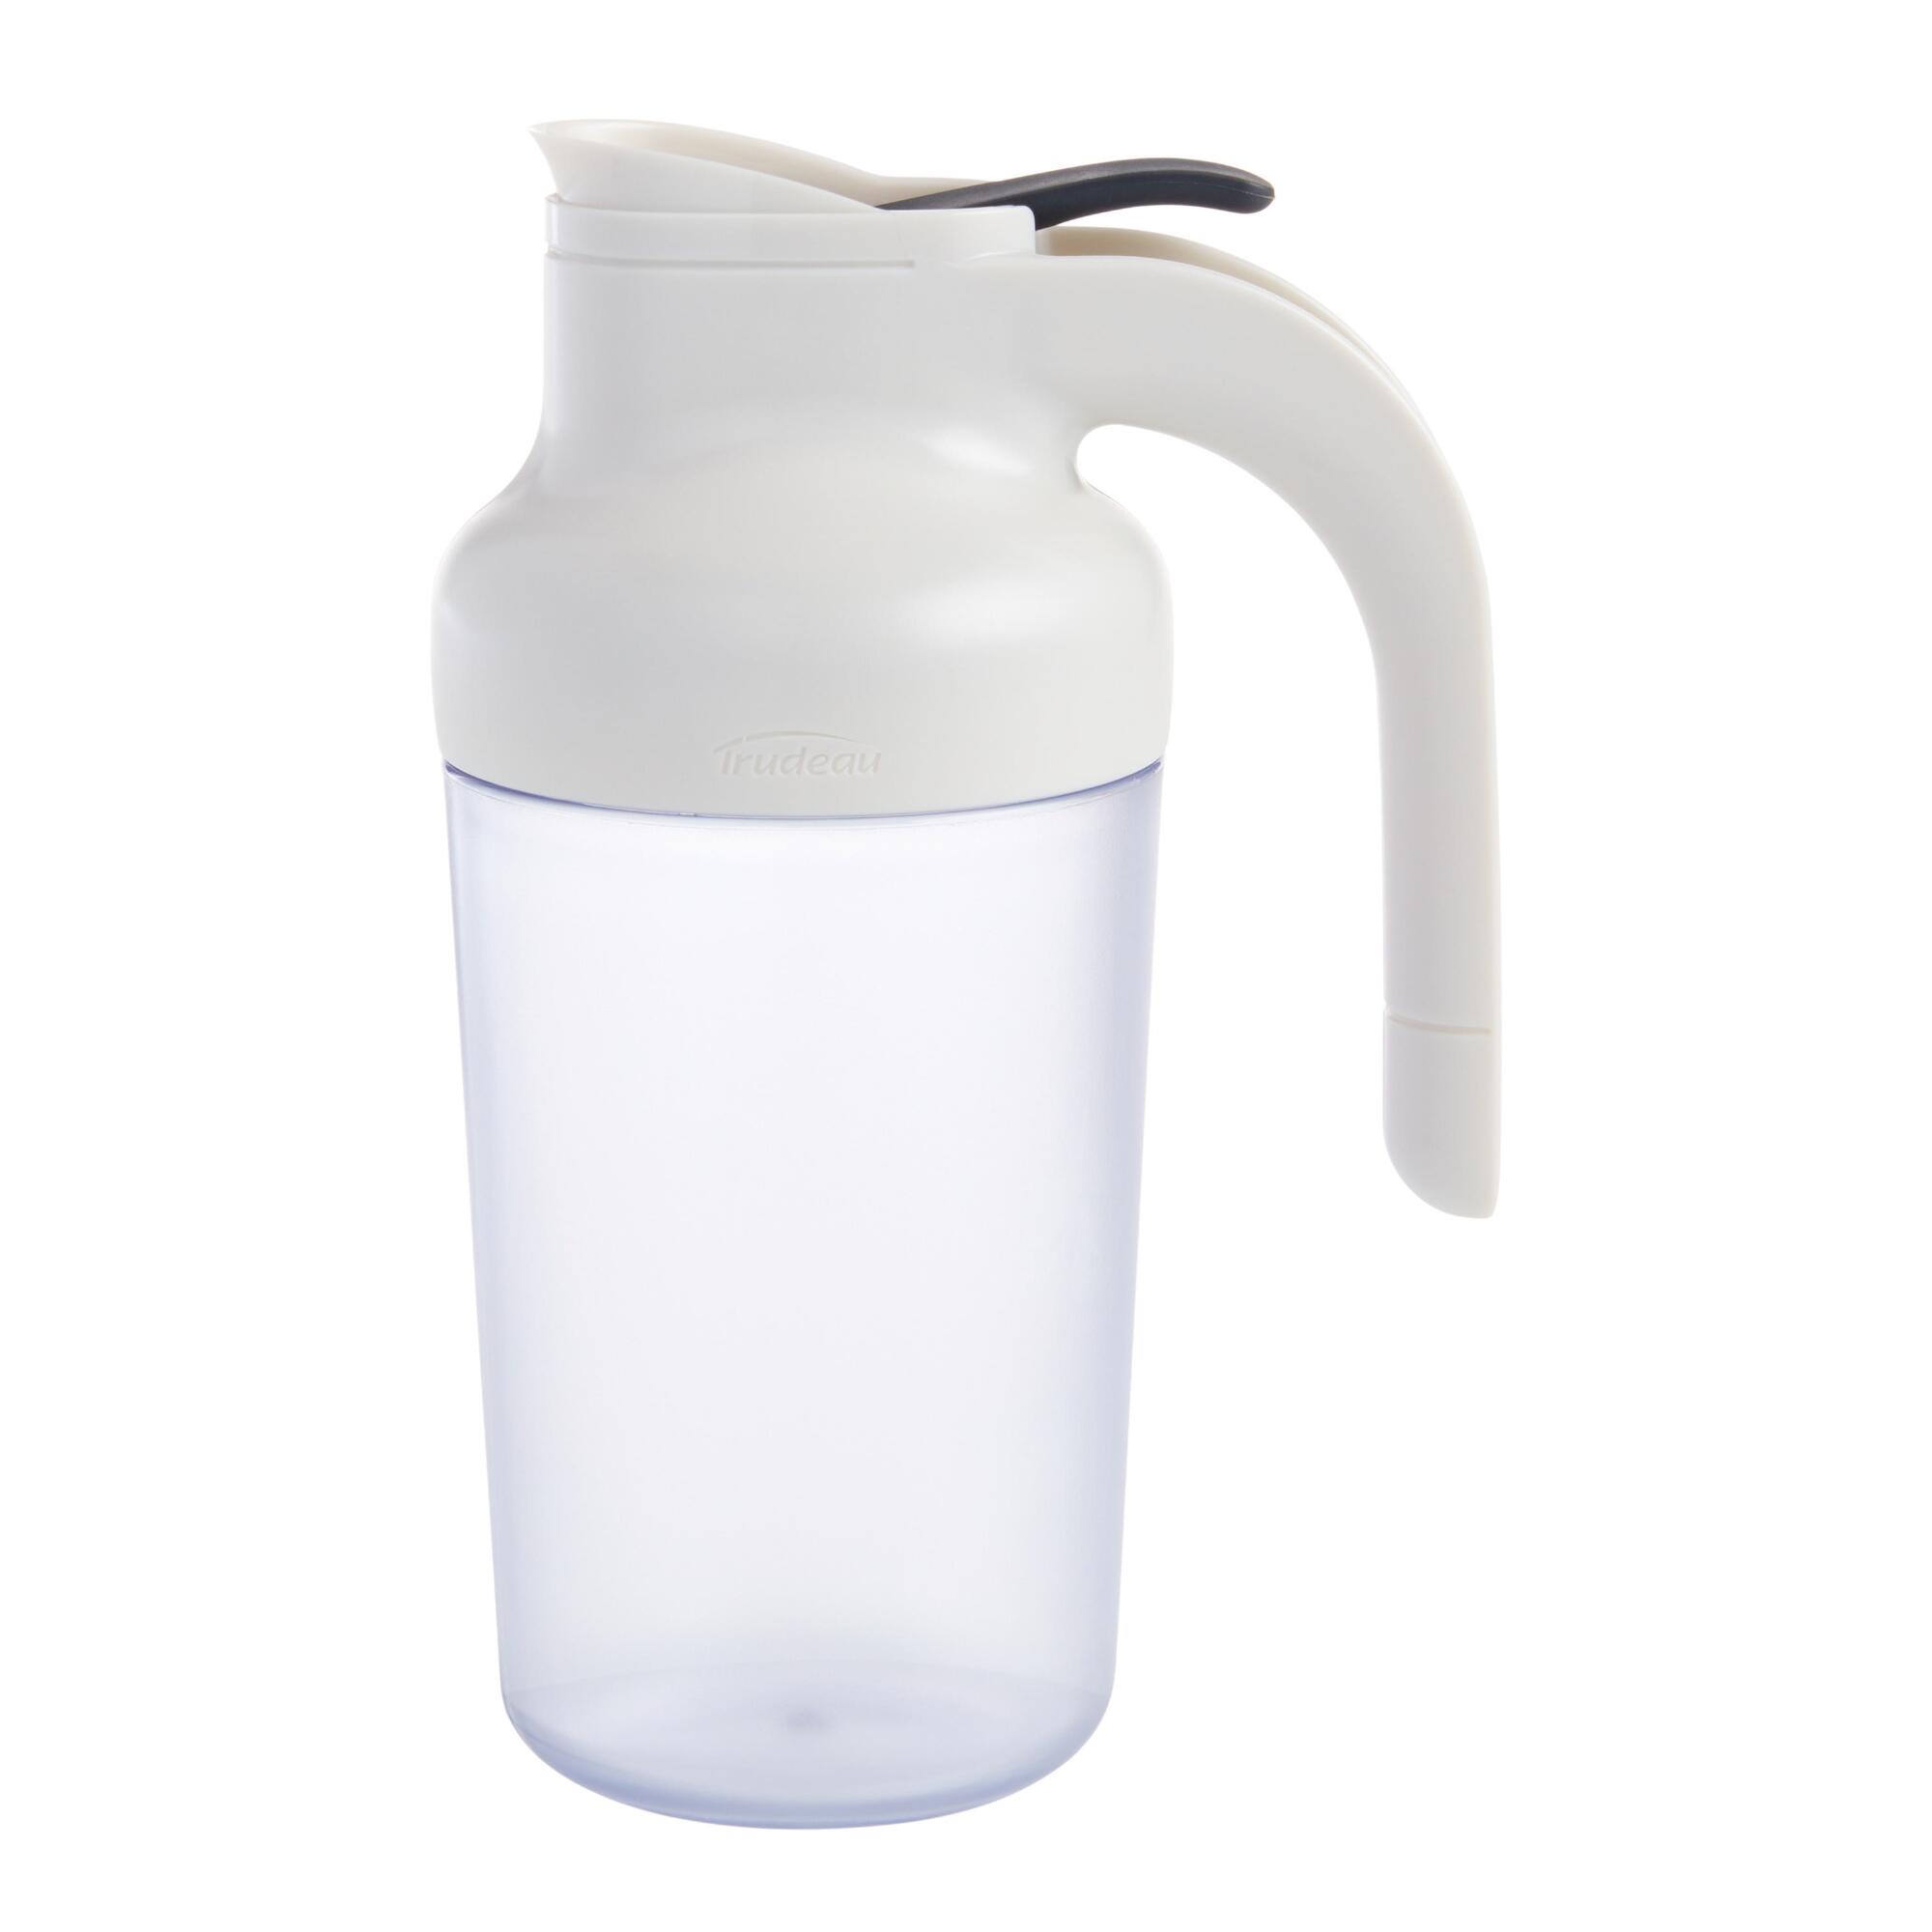 Trudeau Syrup Dispenser: White - Plastic by World Market